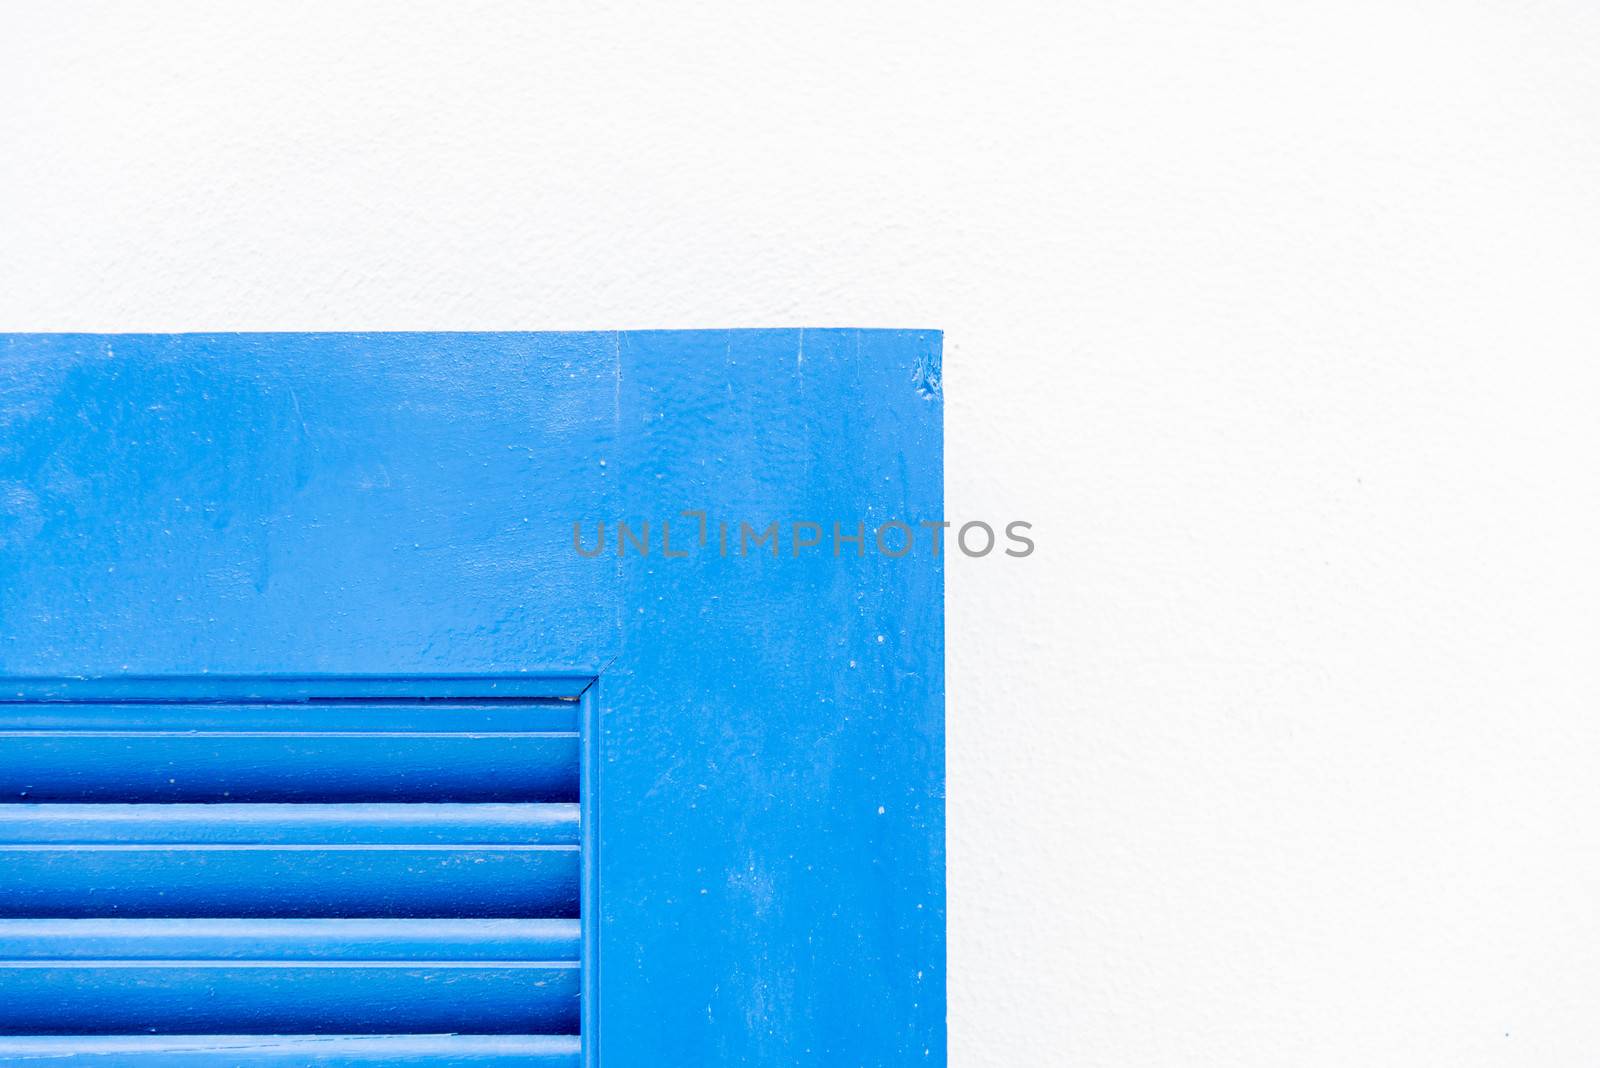 Edge of blue wooden window with white wall2